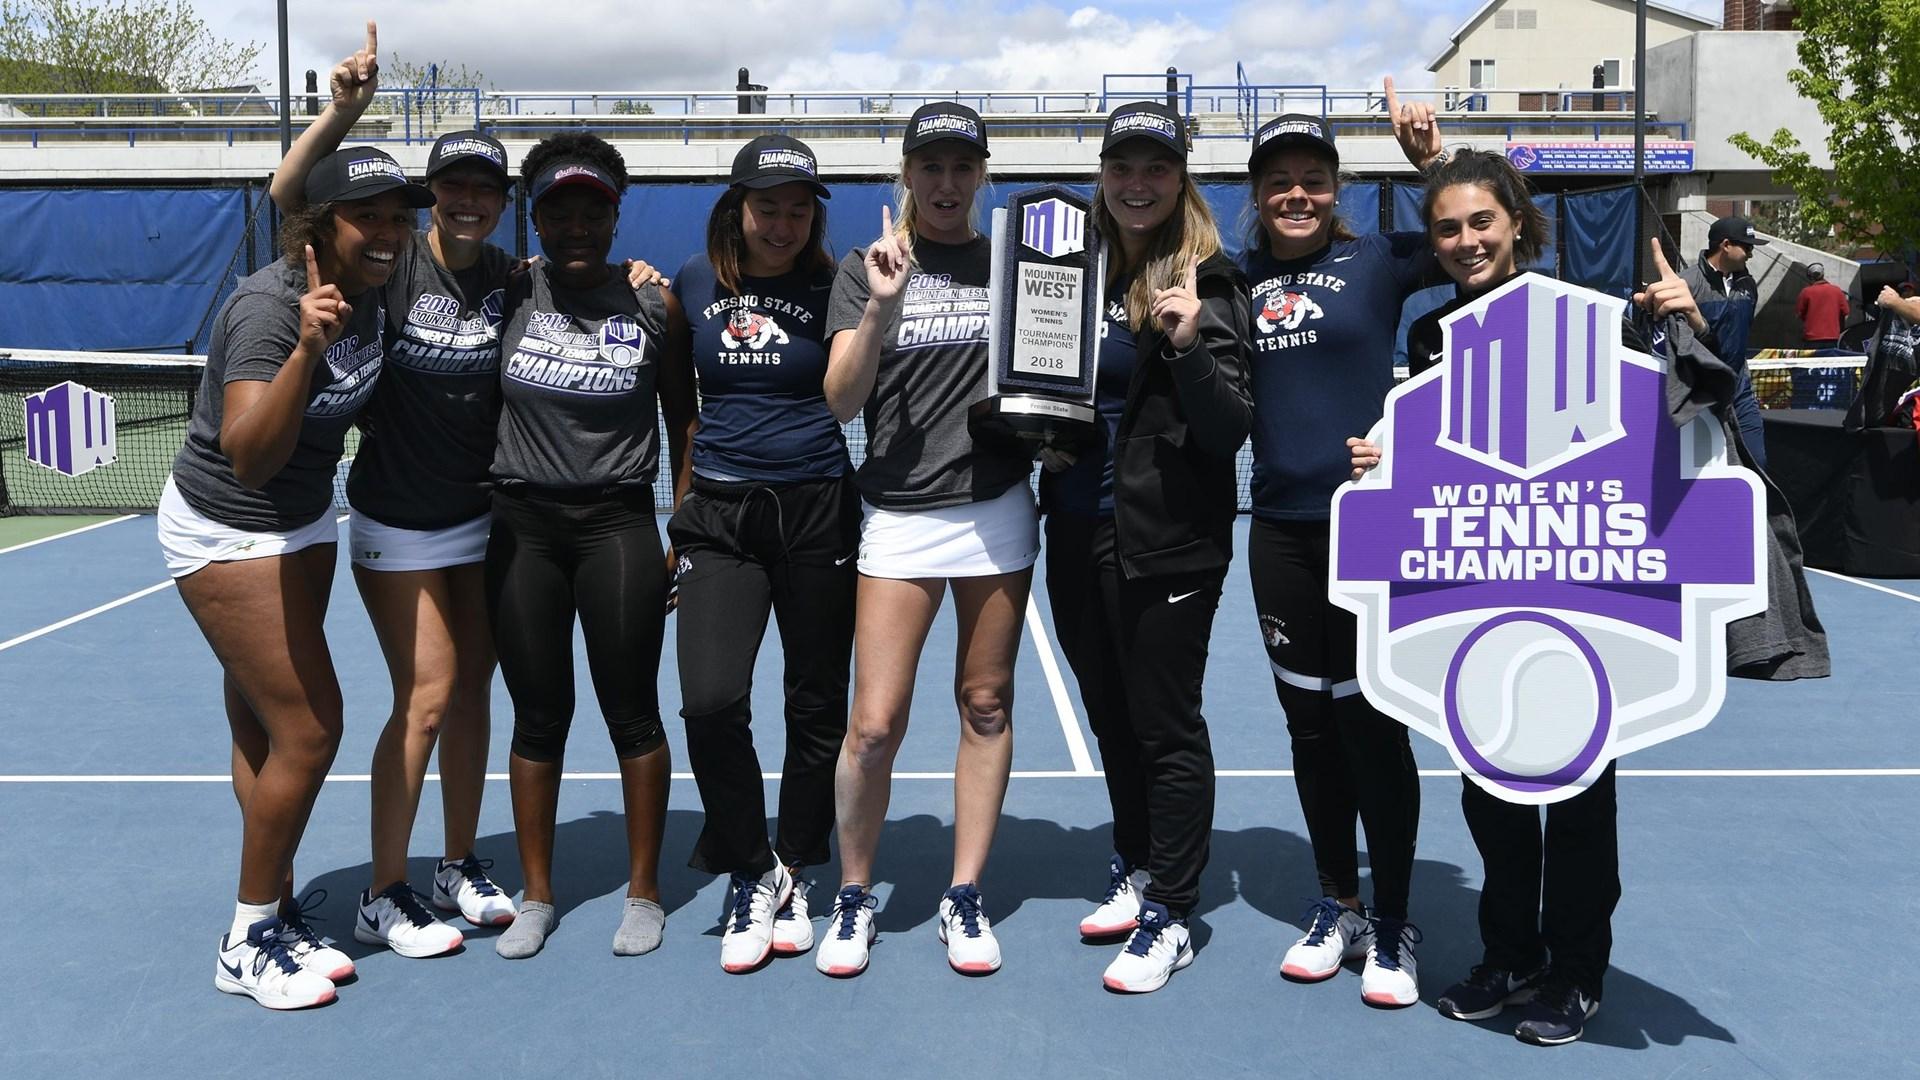 The Fresno State women’s tennis team is set to face No. 12 UCLA in the first round of the NCAA Championships after winning the Mountain West Championships on April 29, 2018. (Fresno State Athletics) 